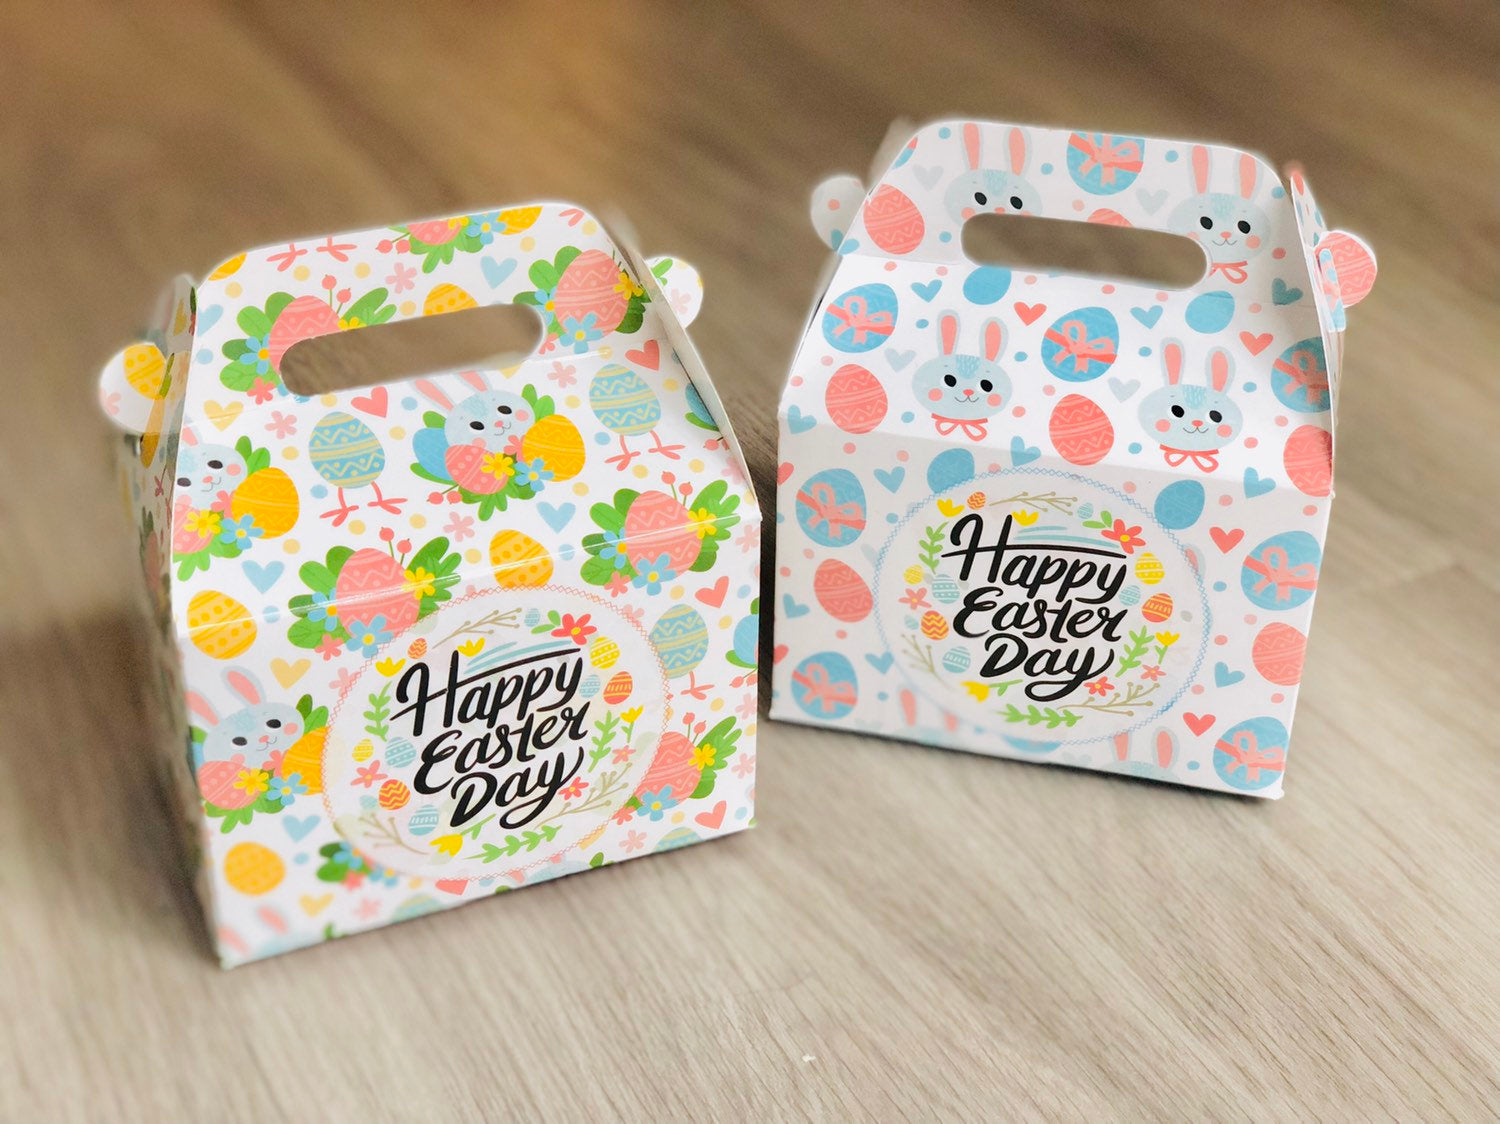 Rabbit Bunny Happy Easter Day Favor Boxes / Treat Boxes / Gift Boxes / Gable Boxes